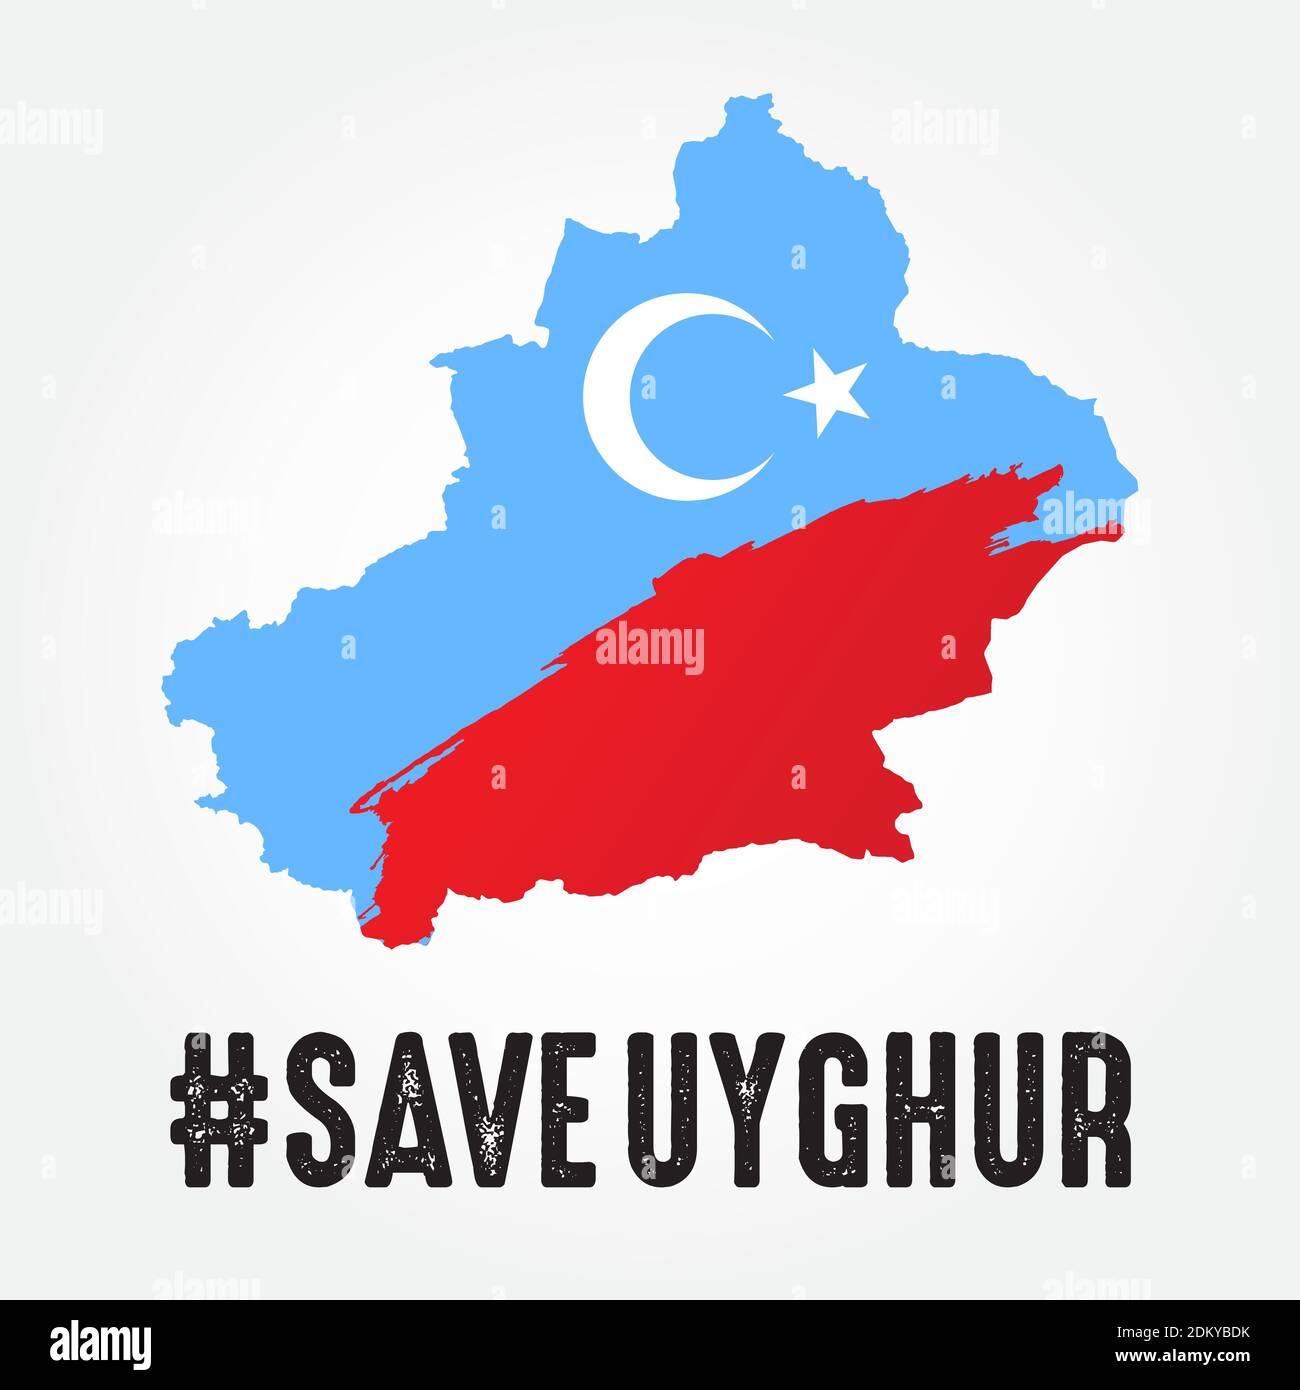 save Uyghur vector Illustration with uyghur map Stock Vector